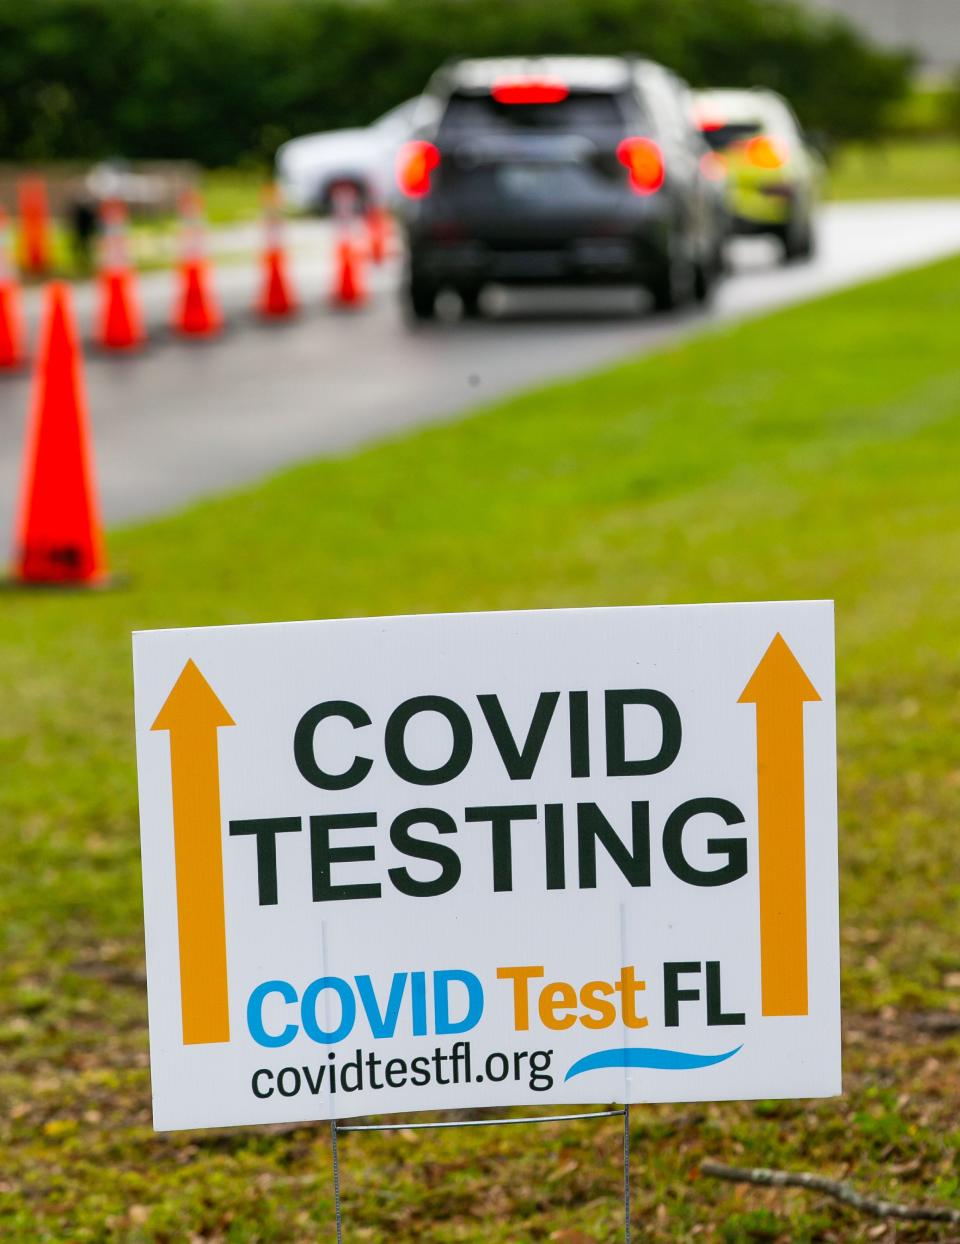 People lined up for COVID-19 testing at the First Baptist Church of Ocala Wednesday morning, January 5. The Florida Department of Health in Marion County and COVID Test Florida LLC has teamed up to offer the drive-thru testing from 8 a.m. to 4 p.m. Monday through Friday.